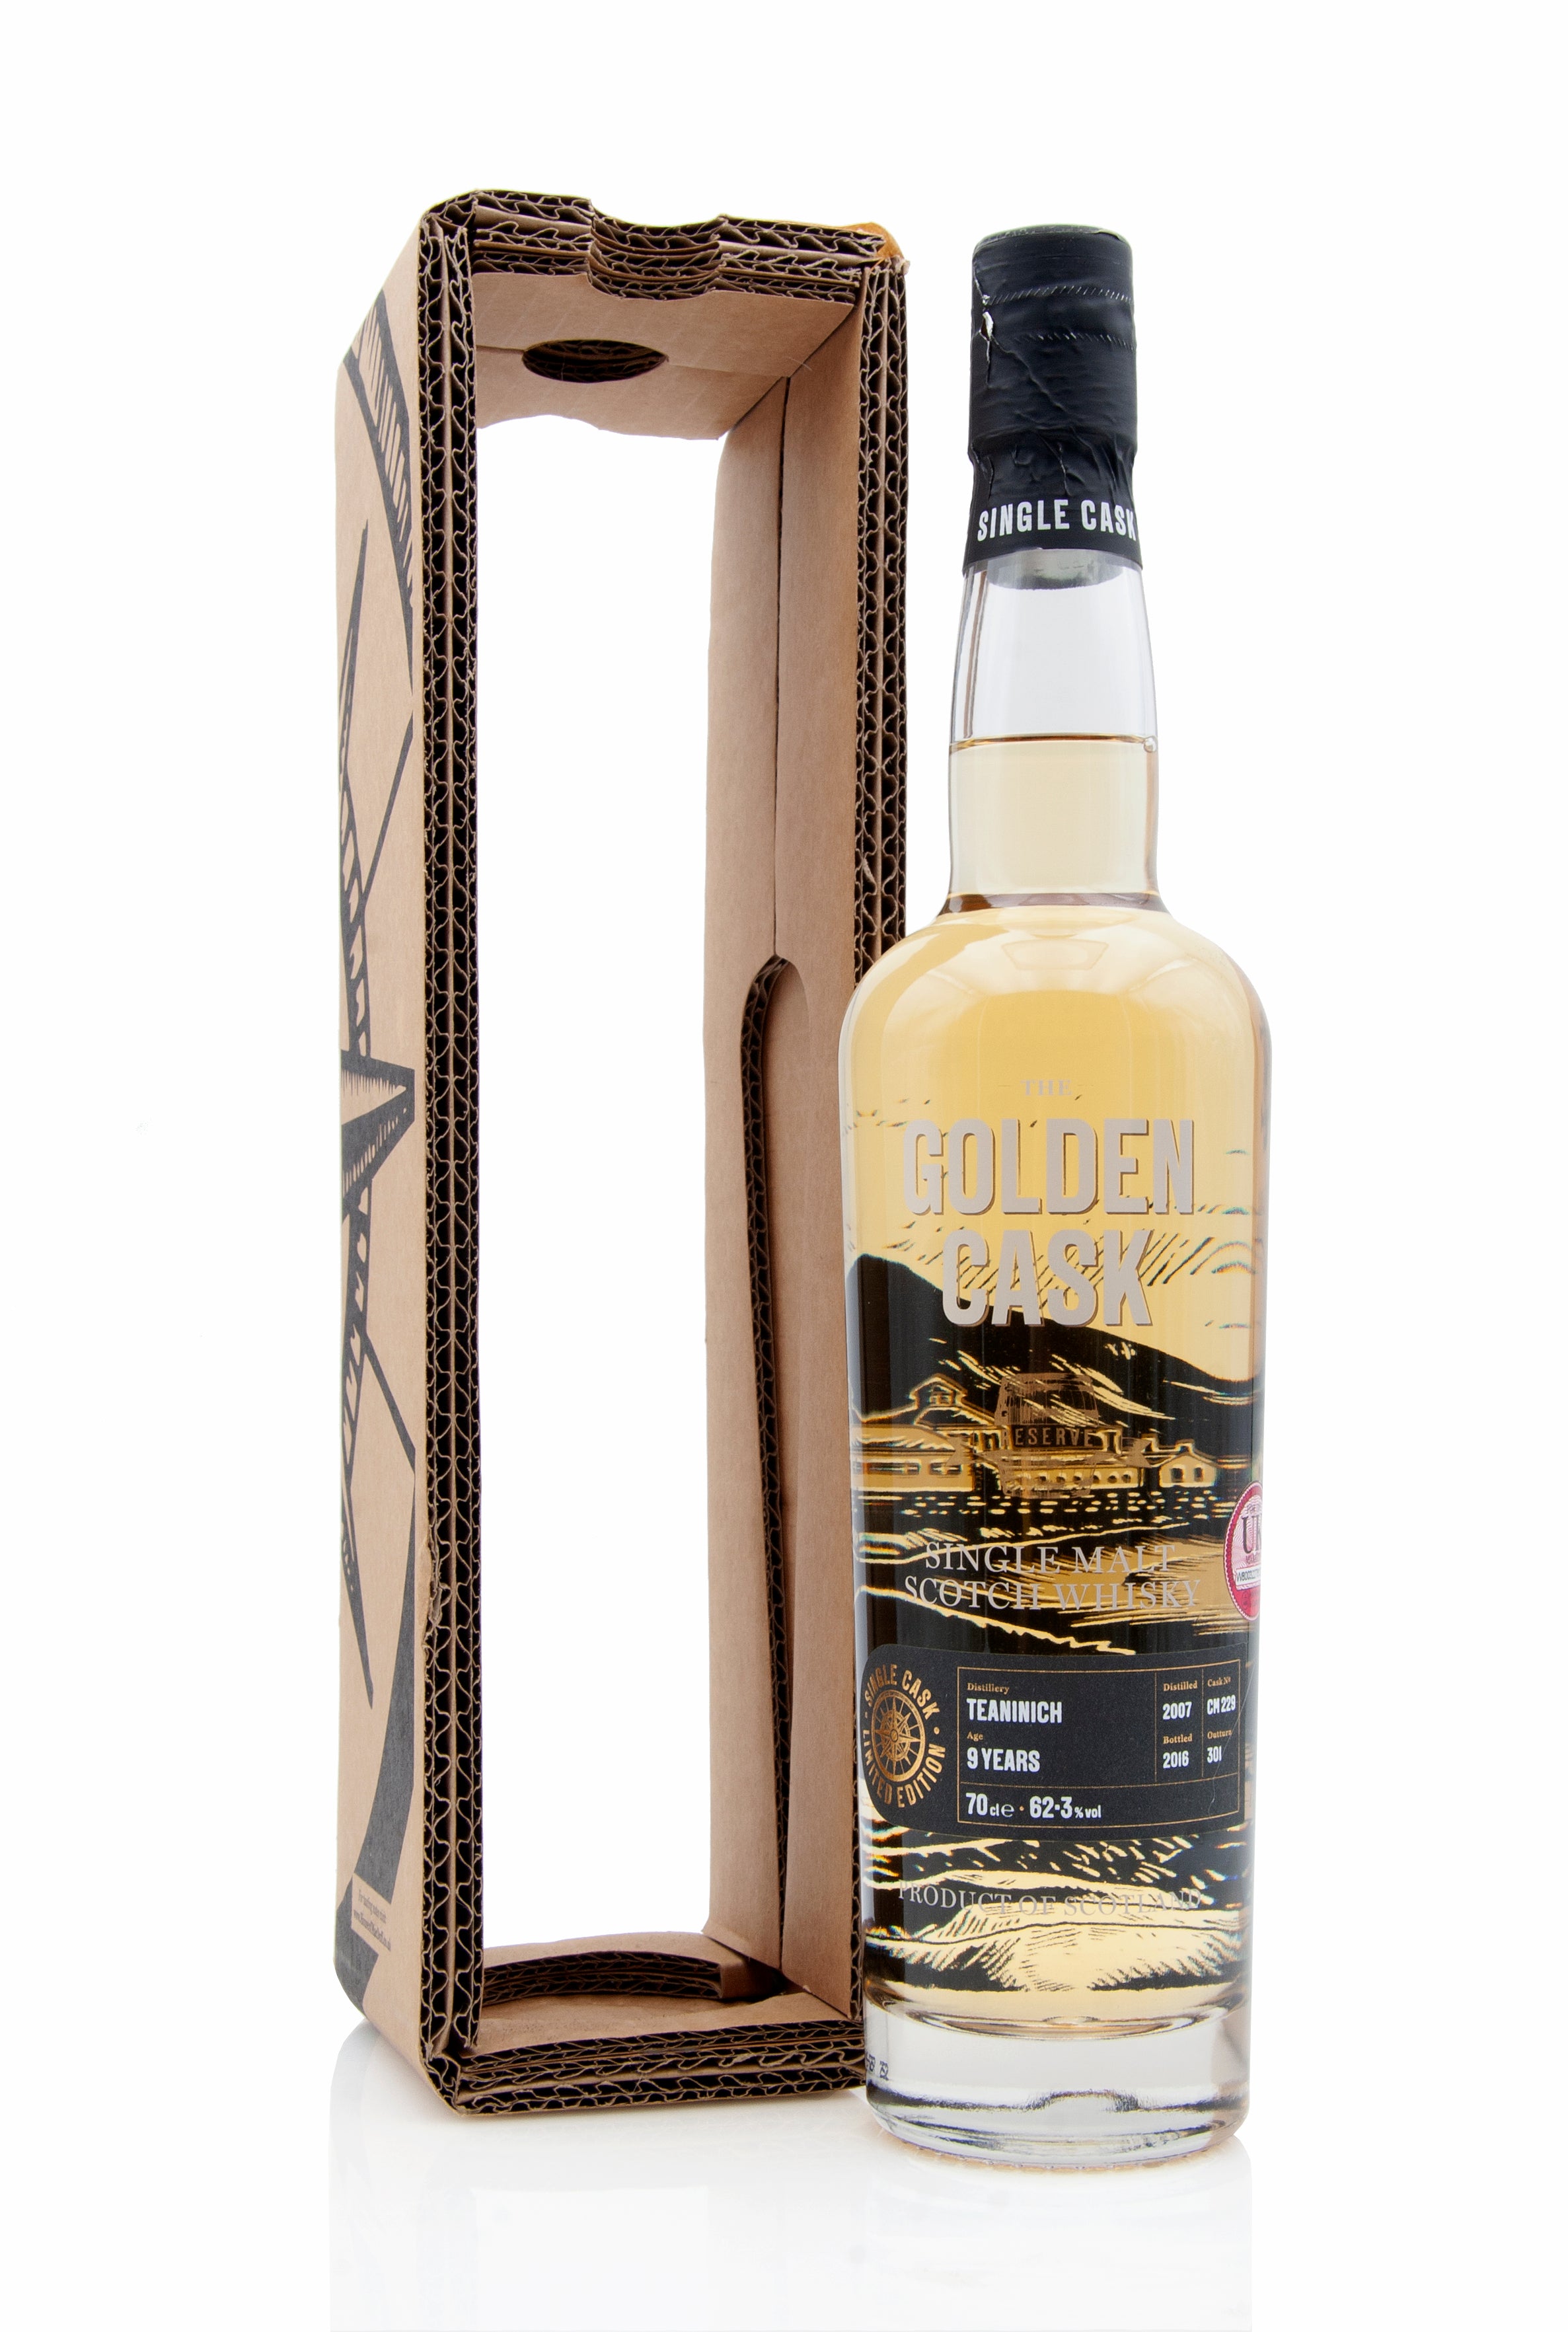 Teaninich 9 Year Old - 2007 | Cask CM229 | The Golden Cask | Abbey Whisky Online